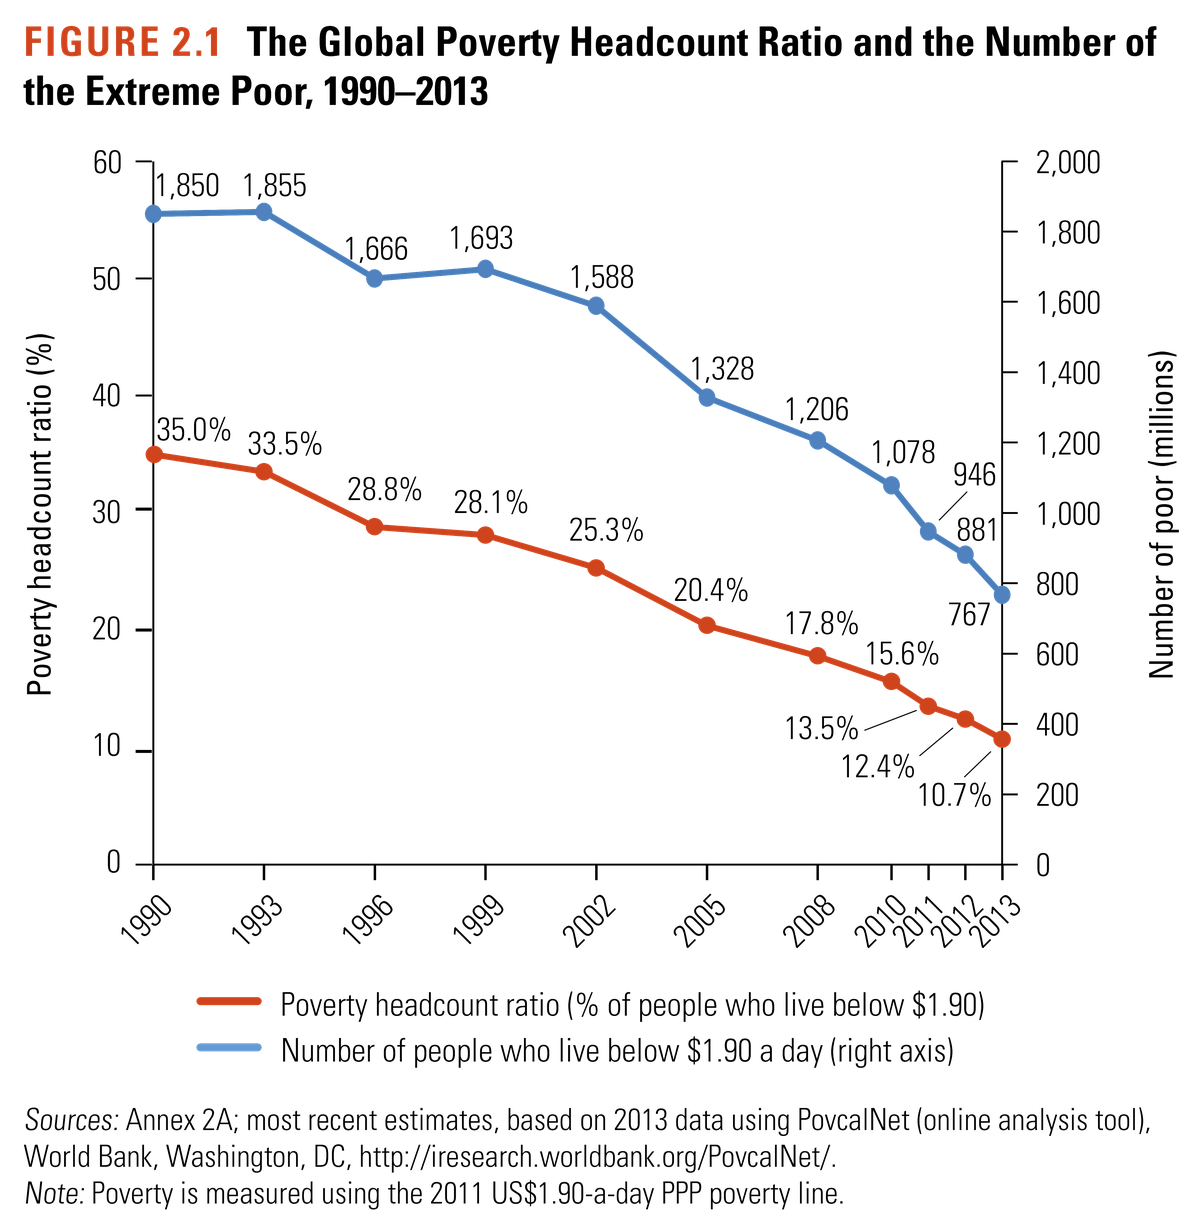 Change in global poverty, 1990 to 2013